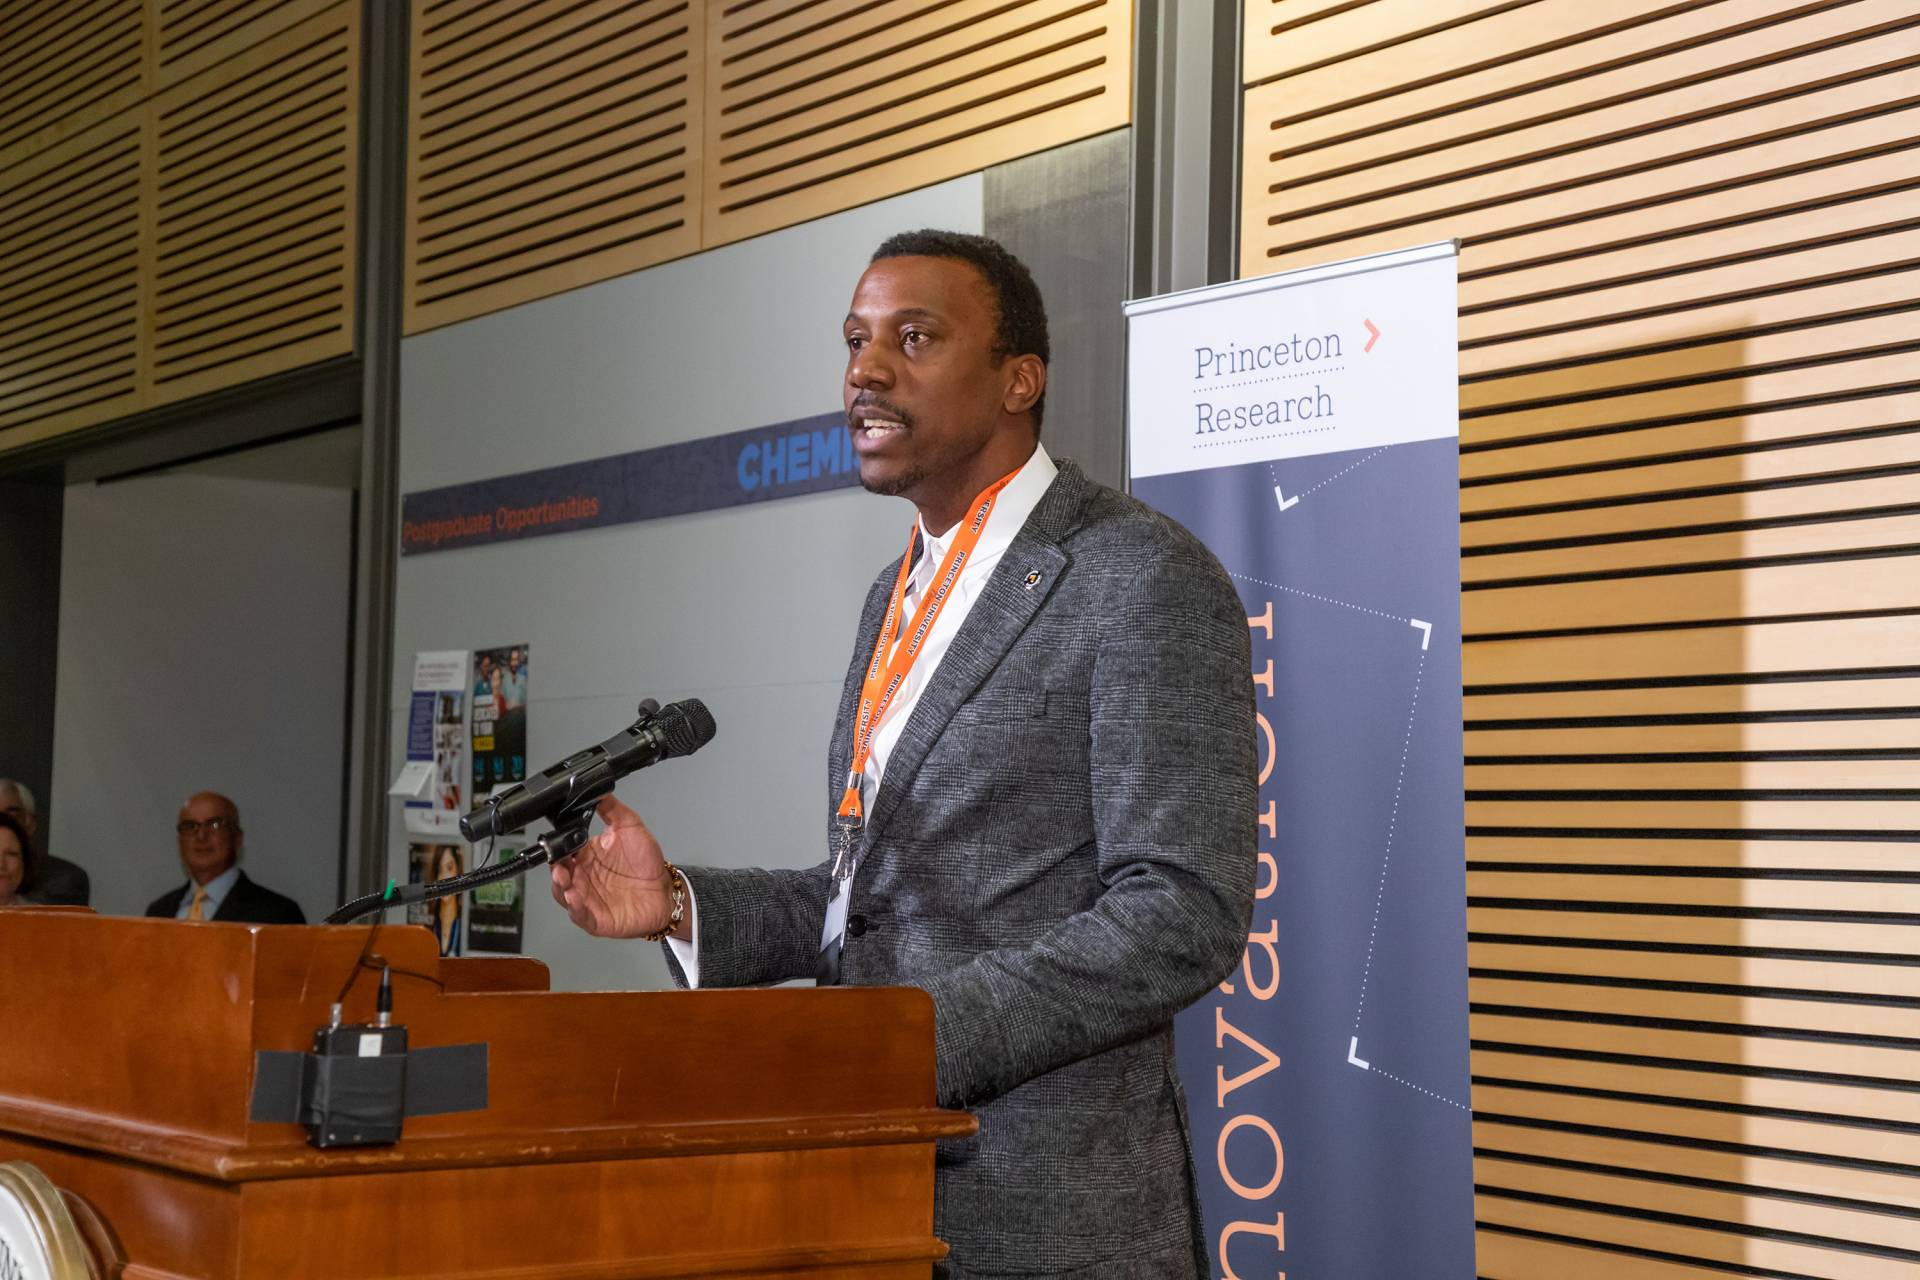 Rodney Priestley speaks at a podium during an event